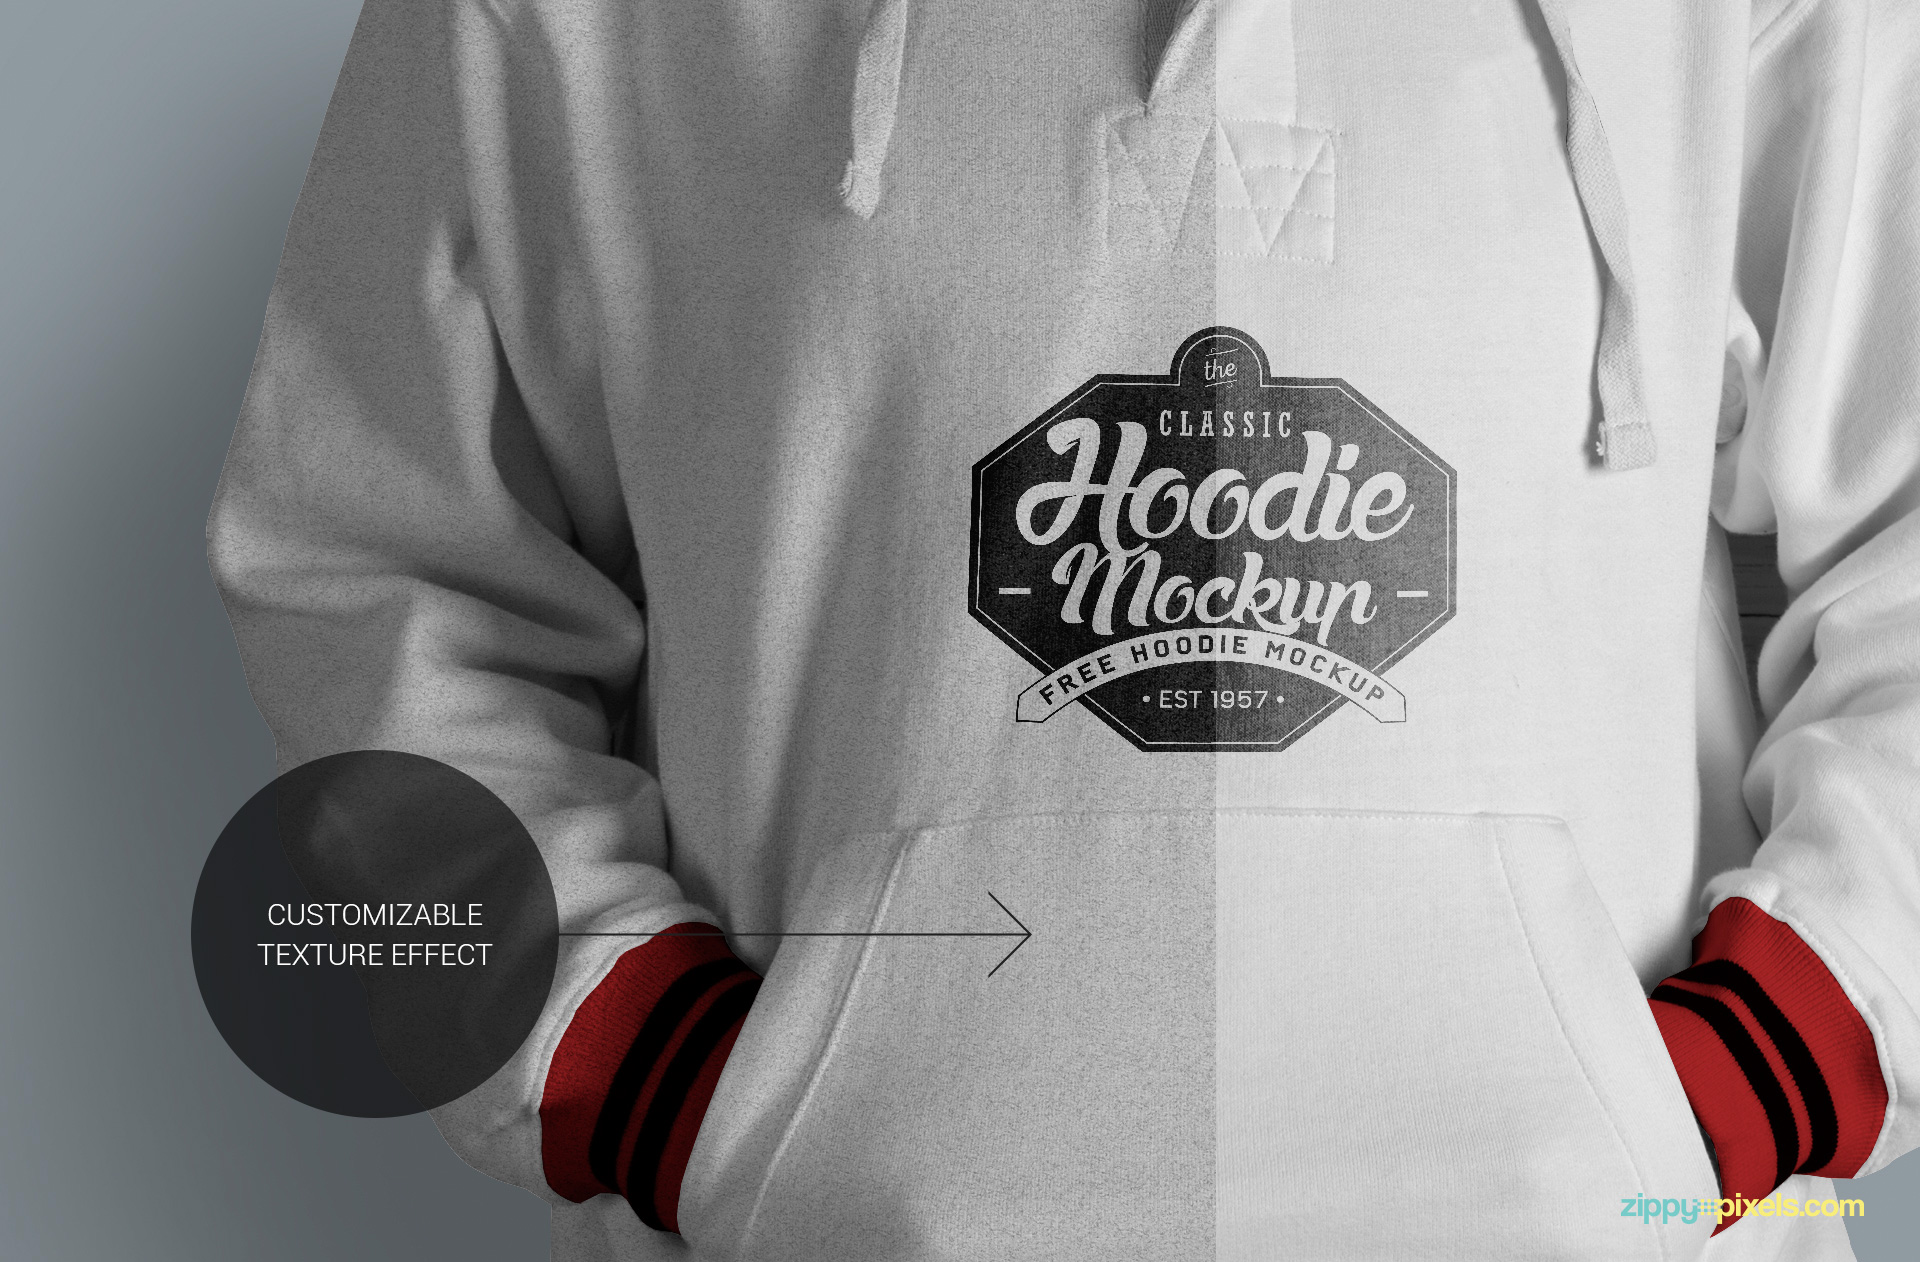 hi-res hoodie mockup with fabric texture effects